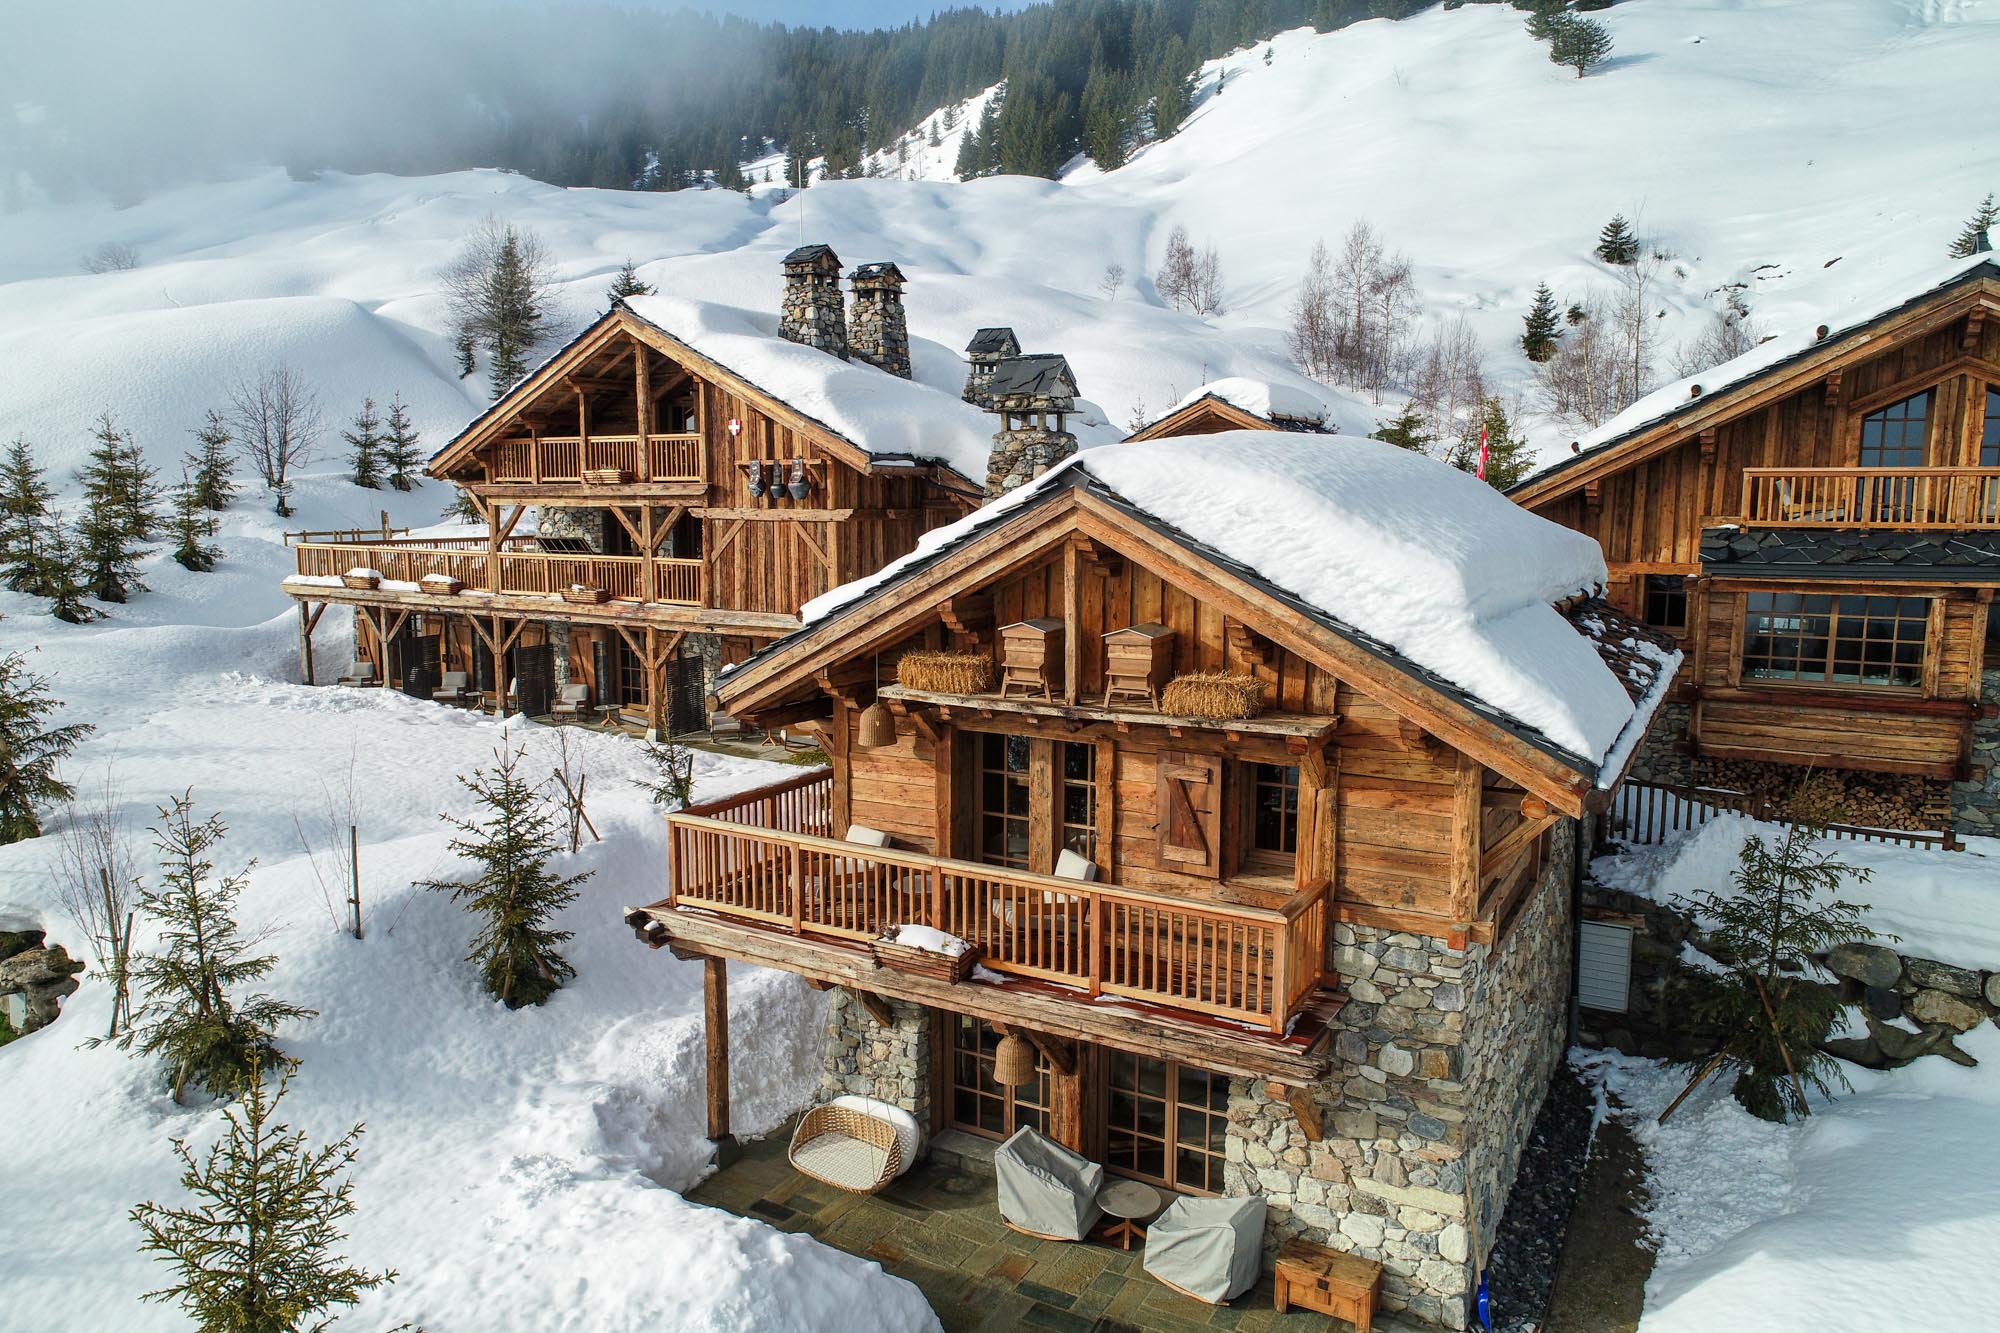 Ultima Courchevel is set to open just in time for the ski season